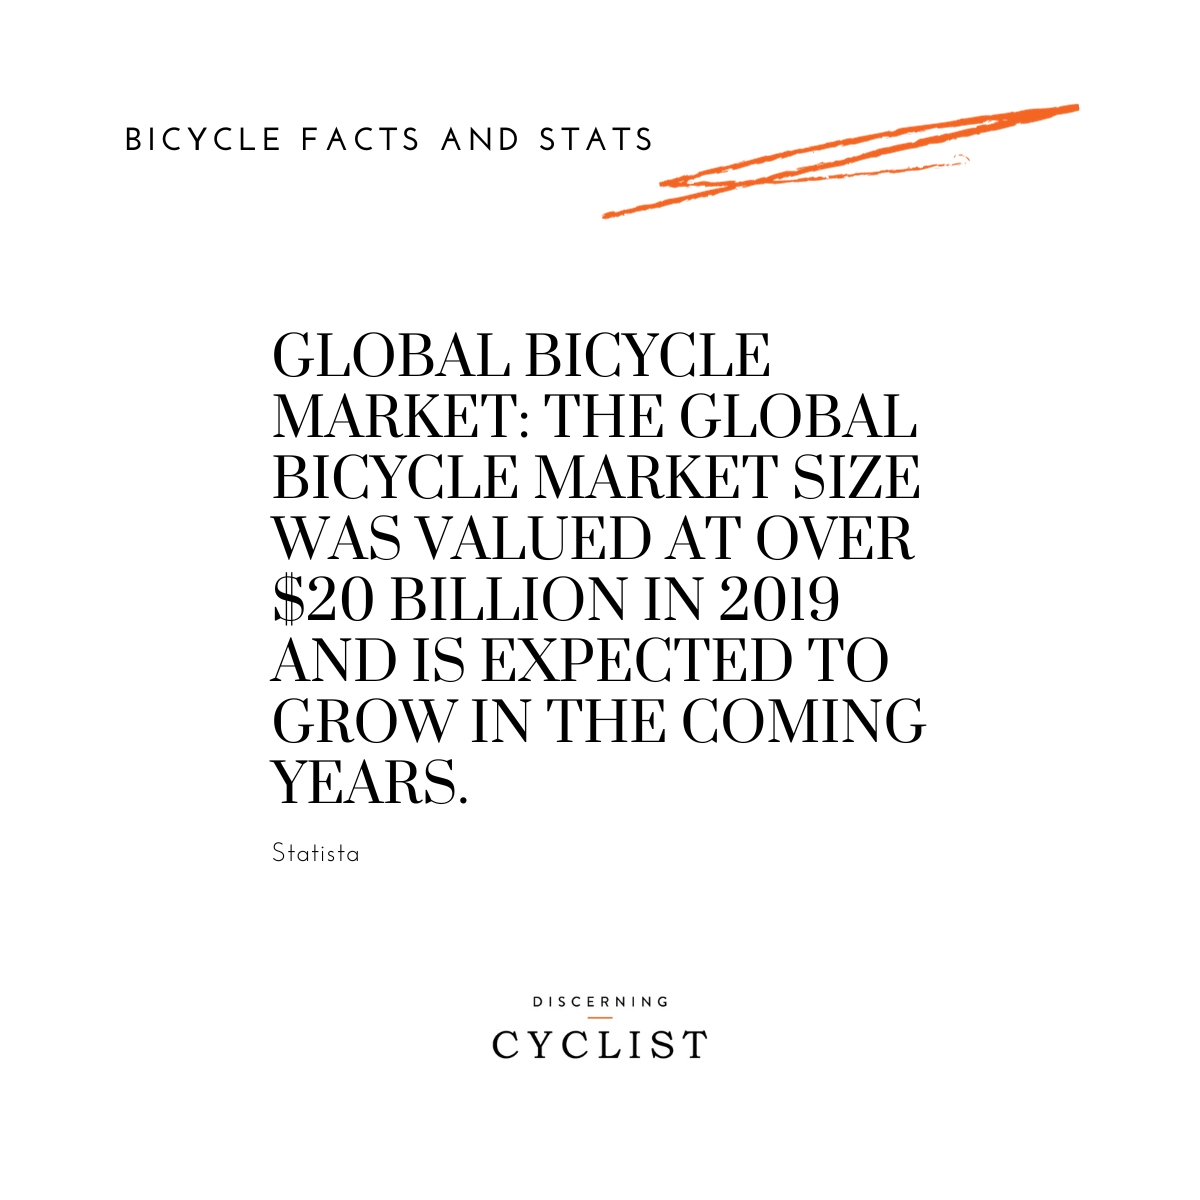 Global Bicycle Market: The global bicycle market size was valued at over $20 billion in 2019 and is expected to grow in the coming years.